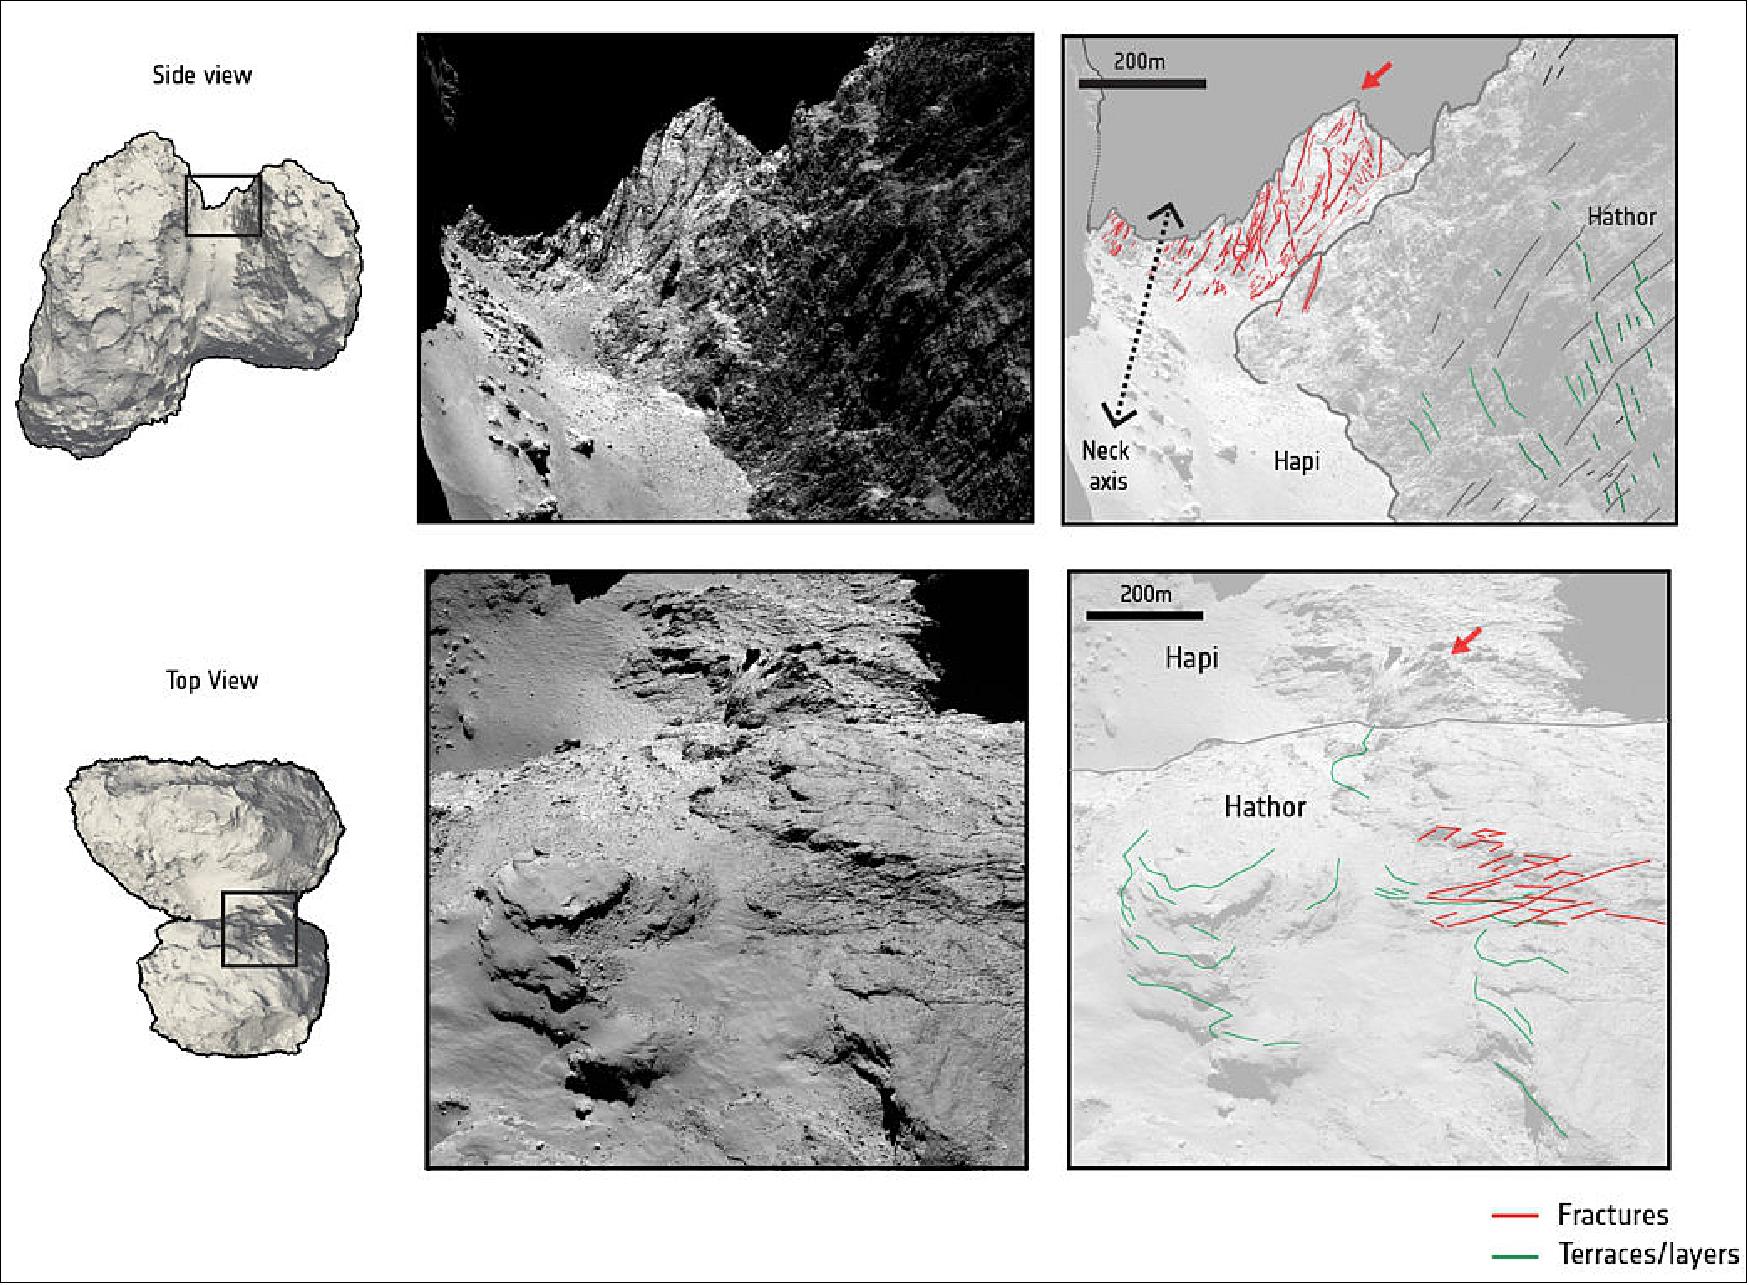 Figure 62: These images show how Rosetta's dual-lobed comet, 67P/Churyumov-Gerasimenko, has been affected by a geological process known as mechanical shear stress. The comet's shape is shown in the left two diagrams from top and side perspectives, while the four frames on the right zoom in on the part marked by the overlaid black box (the comet's ‘neck'). The red arrow points to the same spot in both images, seen from a different perspective. - The two central frames show this part of the neck as imaged by Rosetta's OSIRIS camera, and used in a new study exploring how the comet's shape has evolved over time. The two frames on the right highlight different features on the comet using these images as a background canvas. Red lines trace fracture and fault patterns formed by shear stress, a mechanical force often seen at play in earthquakes or glaciers on Earth and other terrestrial planets. This occurs when two bodies or blocks push and move along one another in different directions, and is thought to have been induced here by the comet's rotation and irregular shape. Green marks indicate terraced layers [image credit: ESA/Rosetta/MPS for OSIRIS Team MPS/UPD/LAM/IAA/SSO/INTA/UPM/DASP/IDA; C. Matonti et al. (2019)] 93) 94)